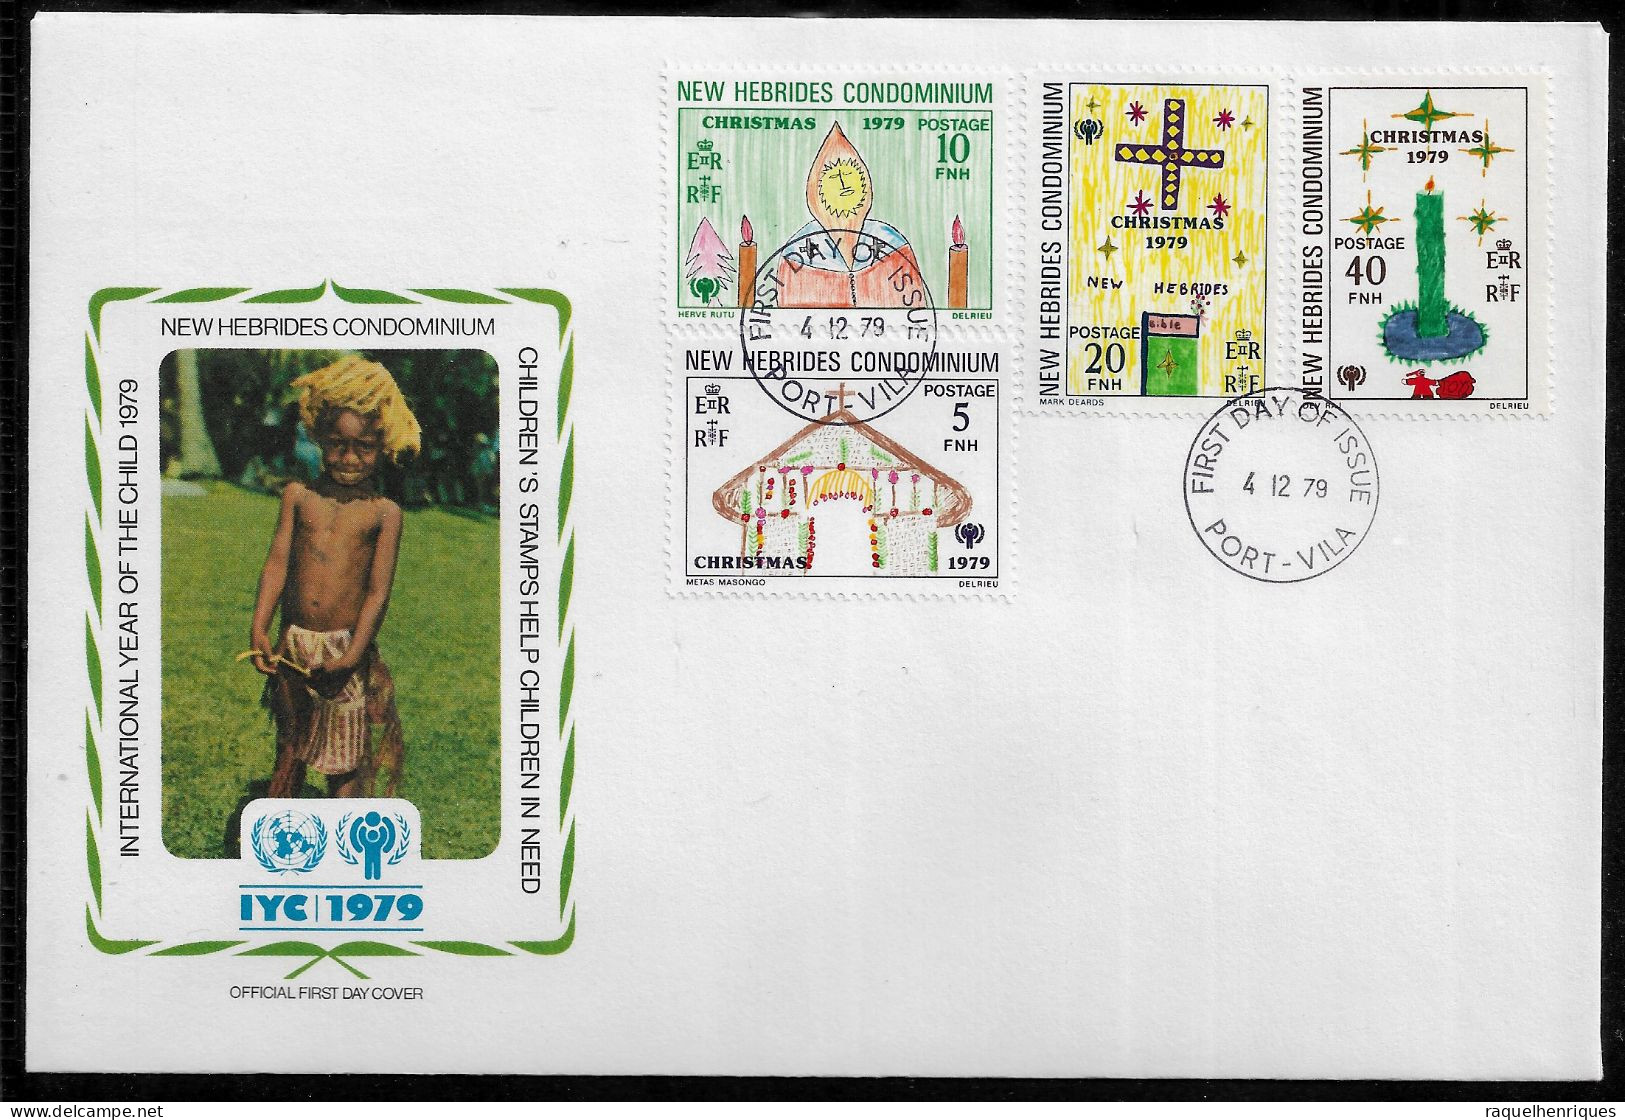 NEW HEBRIDES FDC COVER - 1979 International Year Of The Child ENGLISH SET FDC (FDC79#04) - Brieven En Documenten